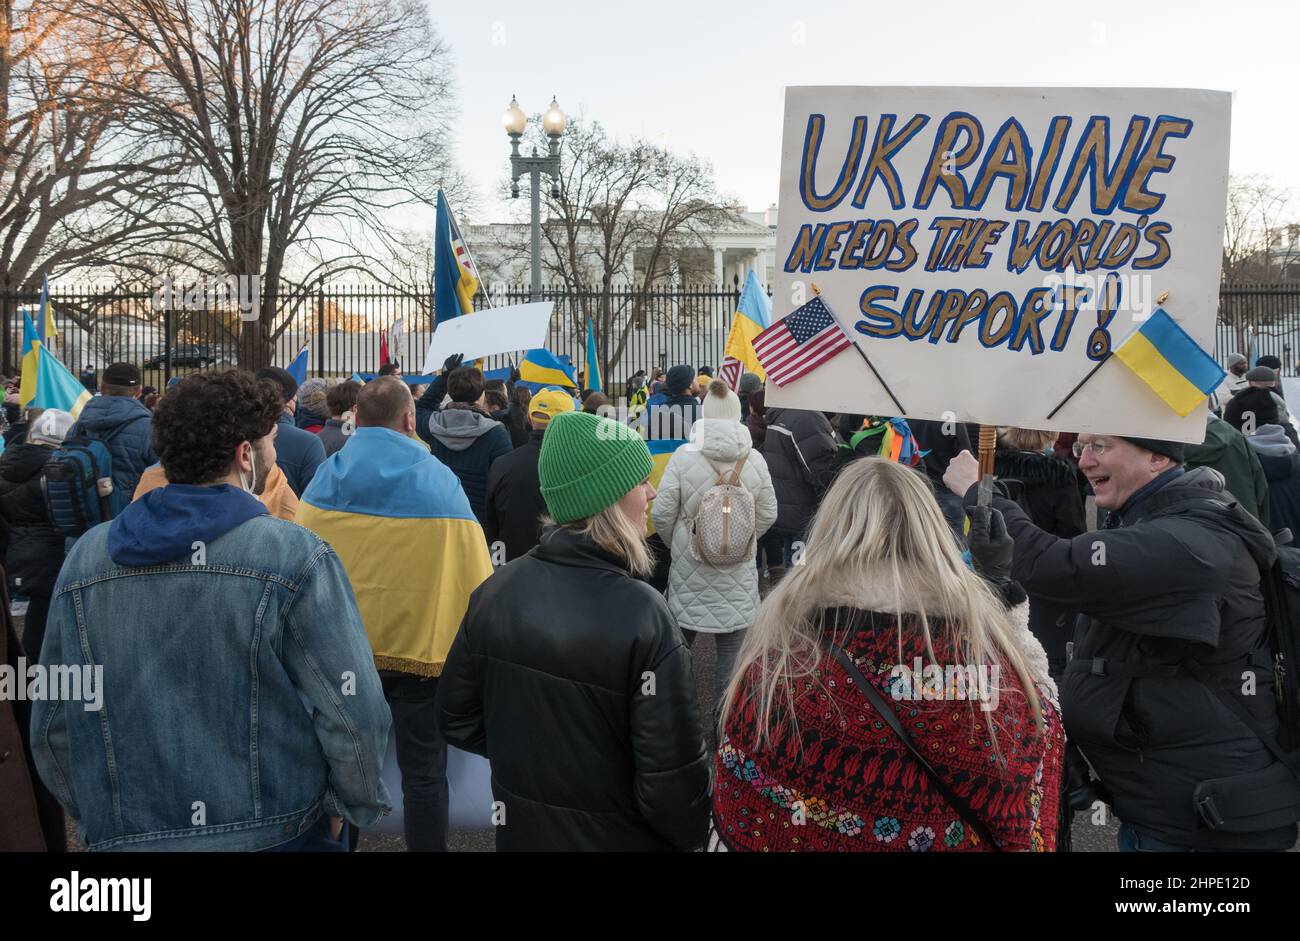 Feb. 20, 2020. Demonstrators at the Stand with Ukraine event arrive at the White House after a rally at the Lincoln Memorial, where they demanded an end to Russia’s aggression in Ukraine and occupation of Crimea, and implored President Biden to take stronger action to deter a Russian invasion of Ukraine. Stock Photo